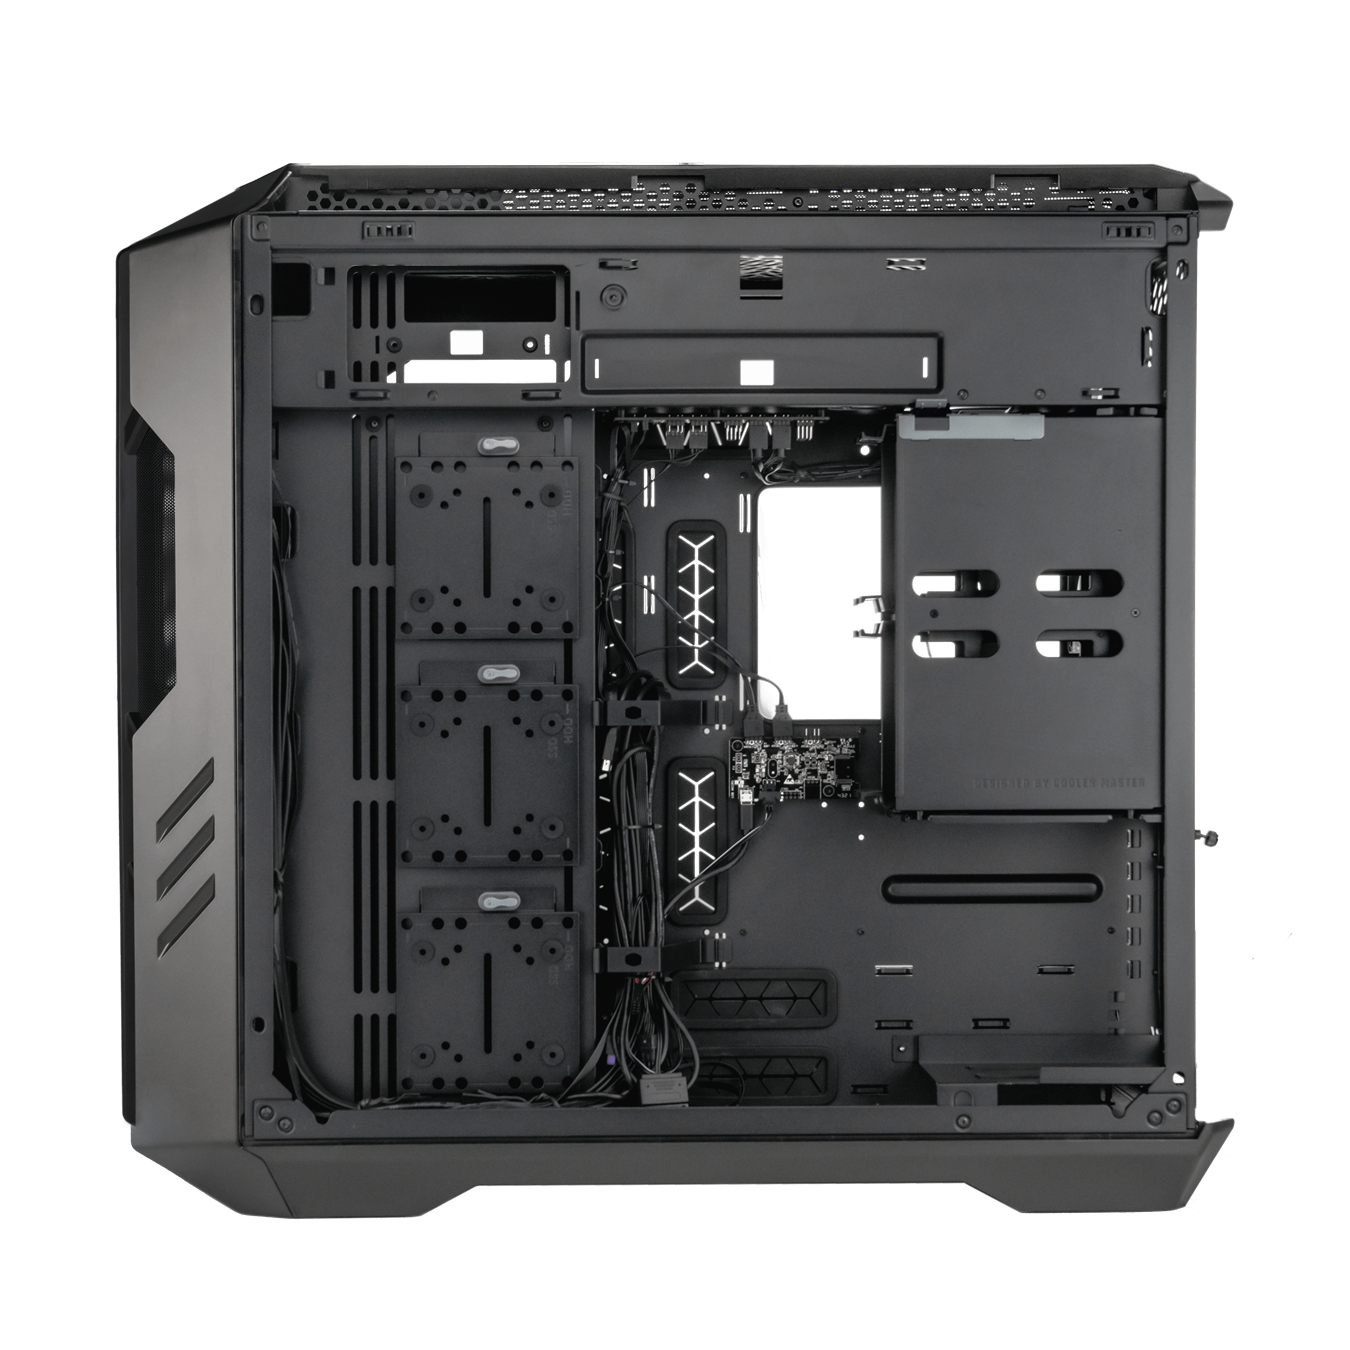 HAF 700 - This chassis features a fully integrated PWM/ARGB Hub that allows for effortless cable management and control over multiple fans and ARGB devices.